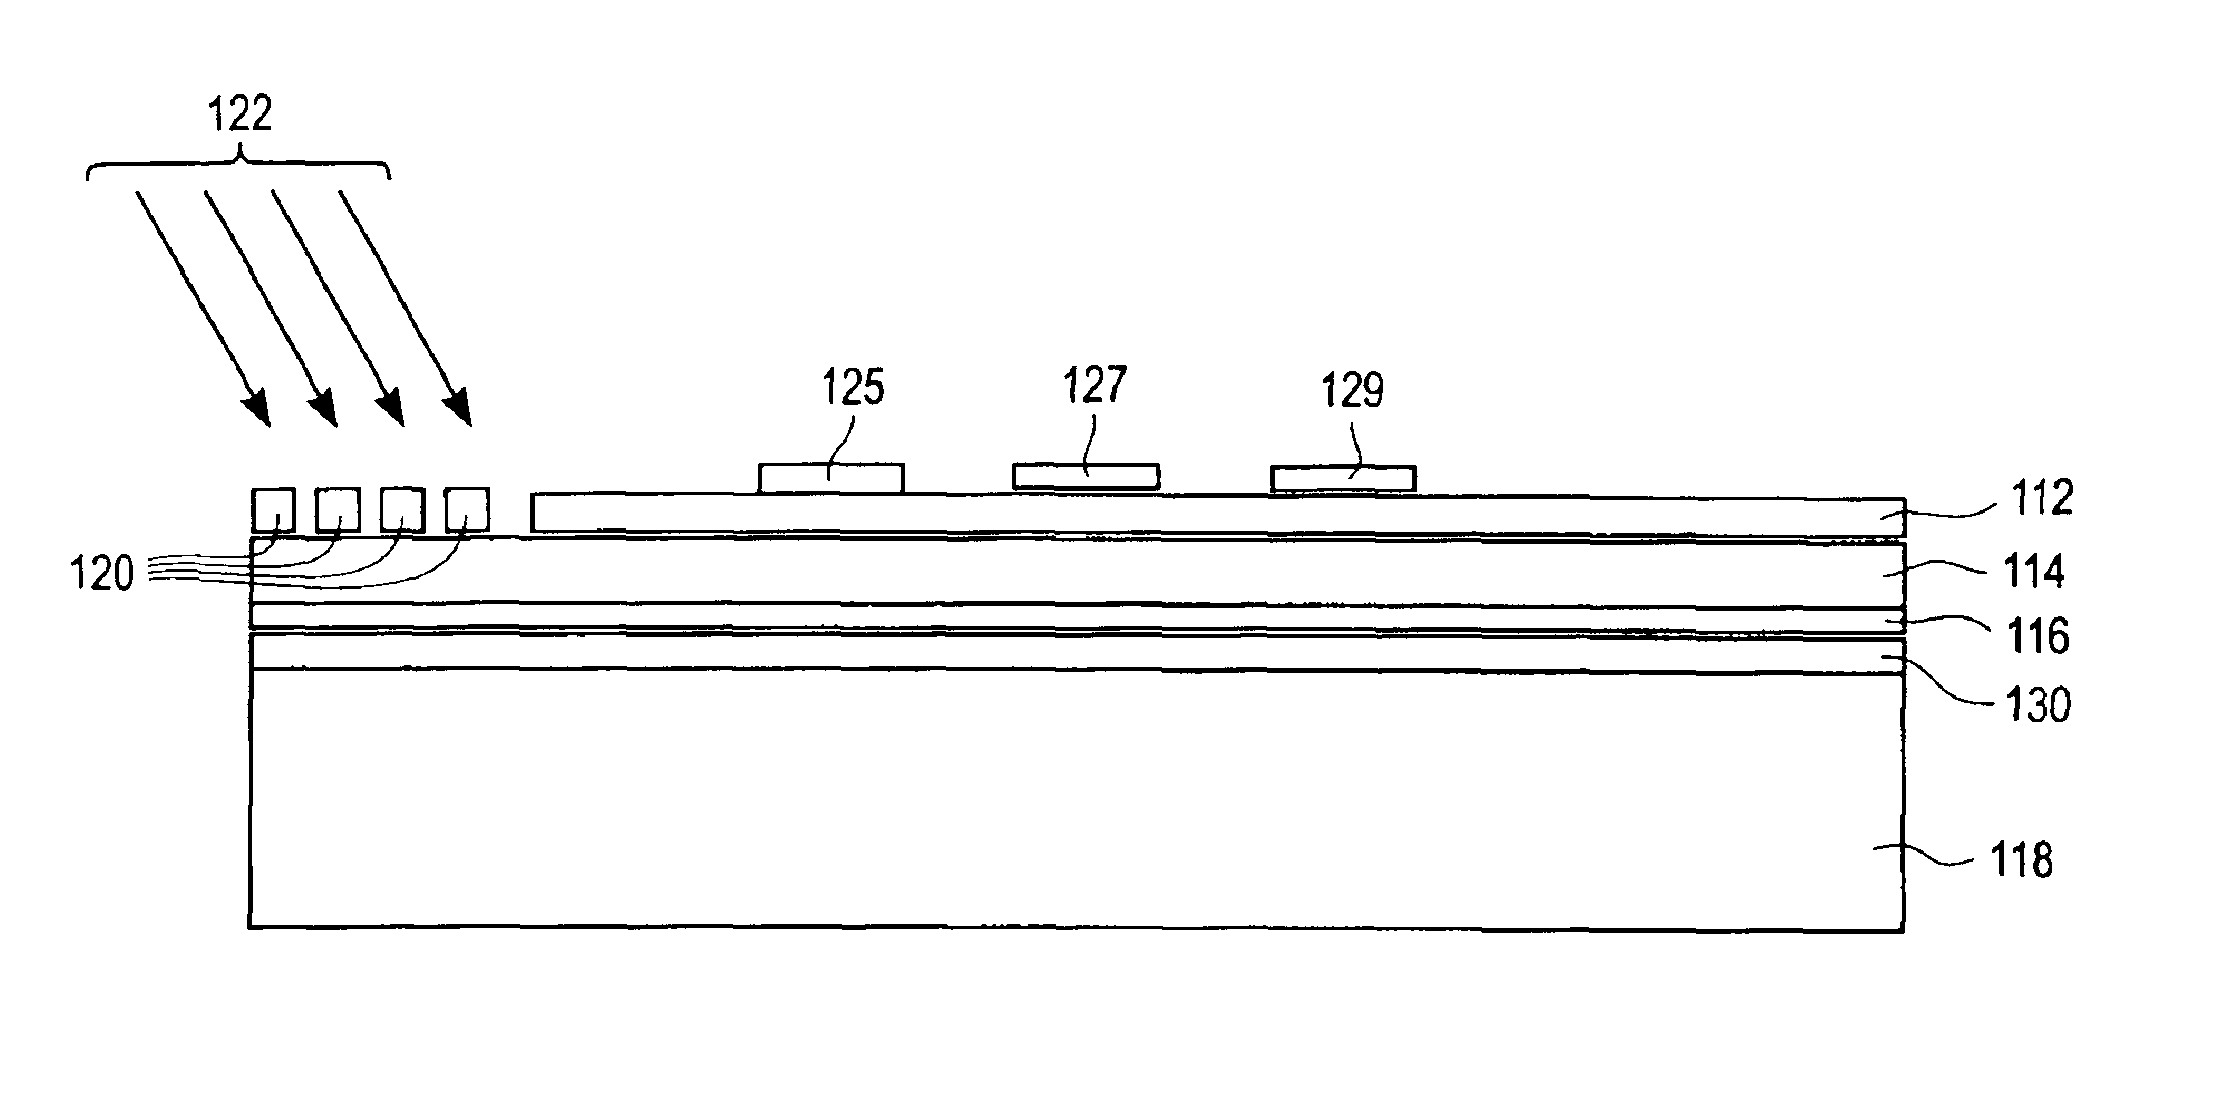 Optical switch fabricated by a thin film process